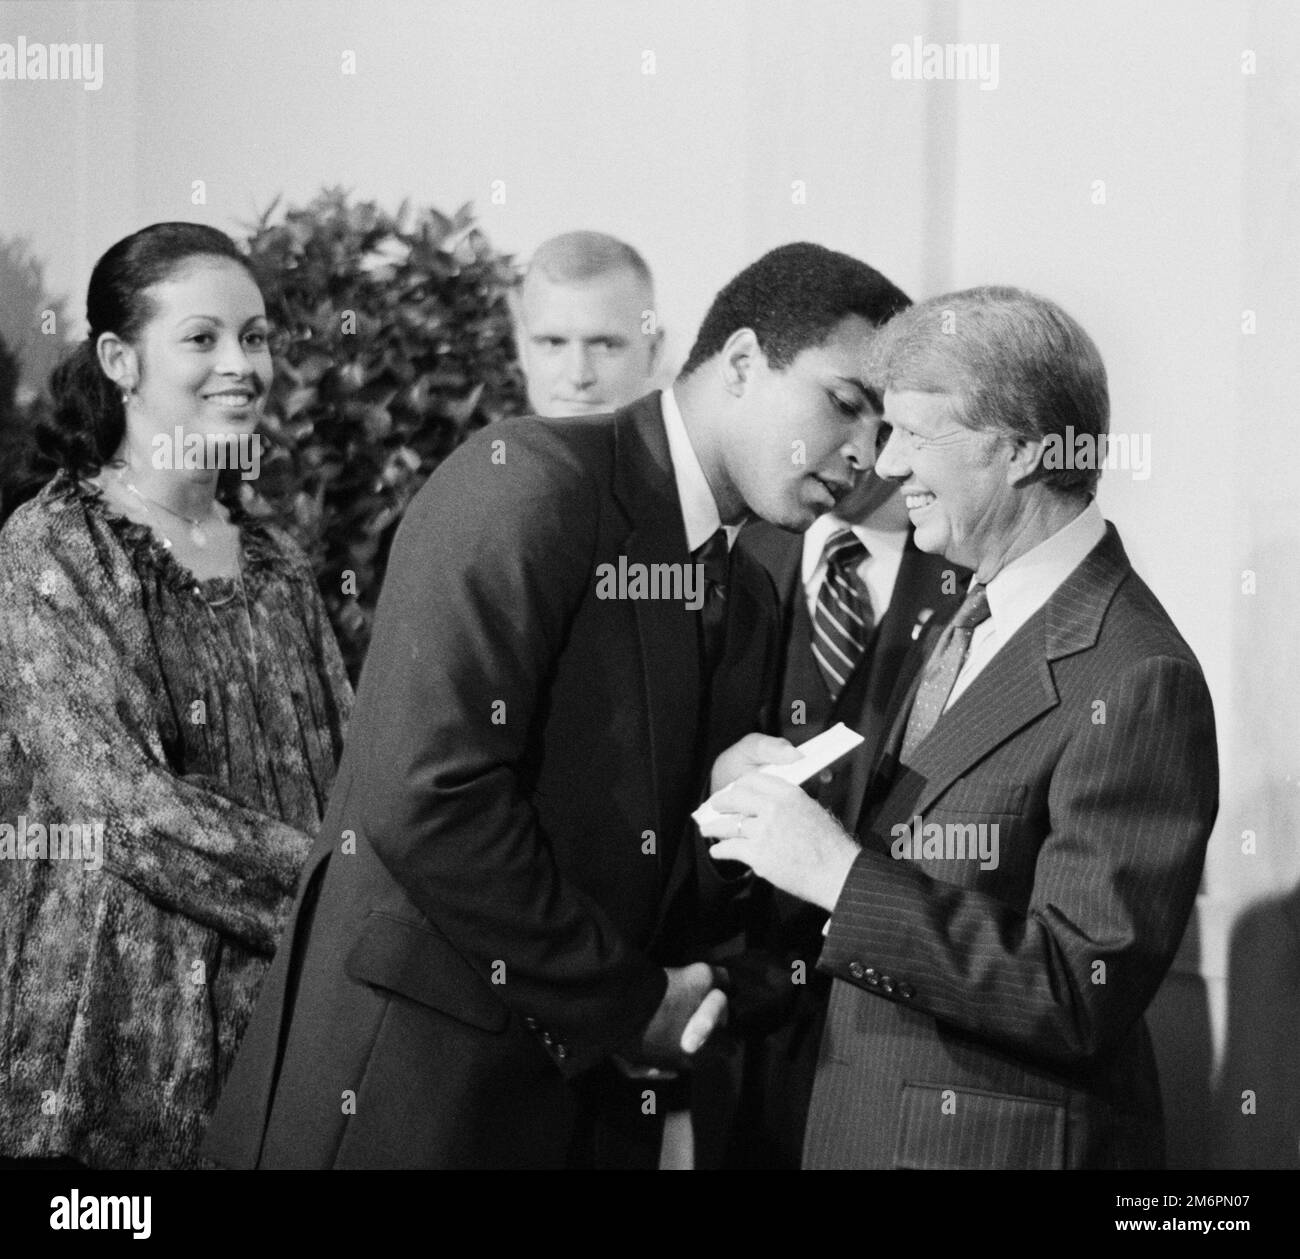 President Jimmy Carter greets Muhammad Ali at a White House dinner, 1977. To the left is the wife of Ali, Veronica Porché Ali. Stock Photo